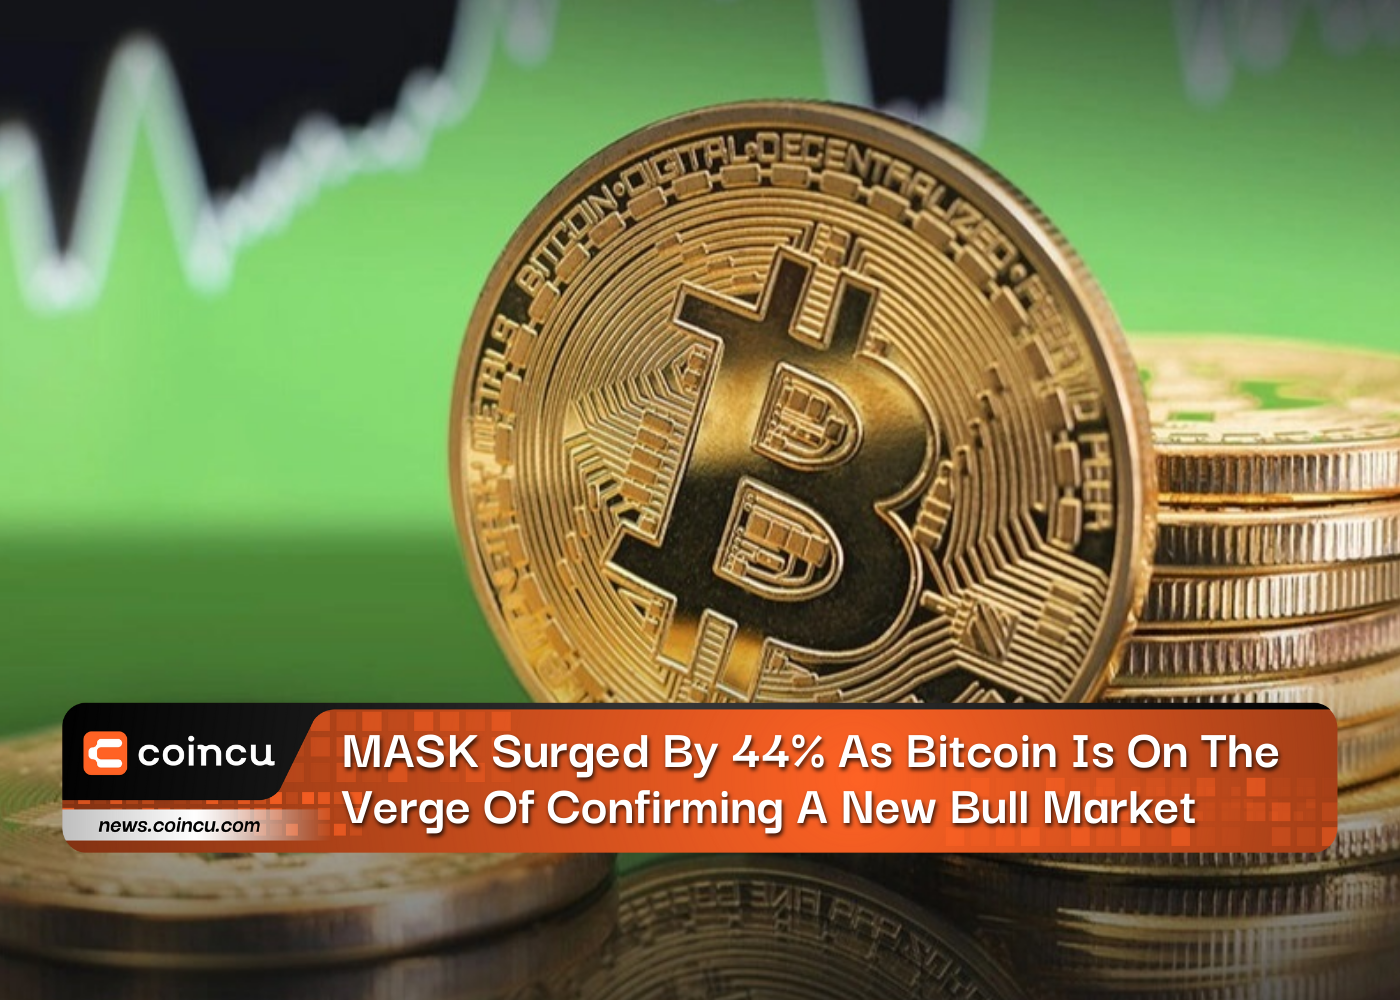 MASK Surged By 44% As Bitcoin Is On The Verge Of Confirming A New Bull Market